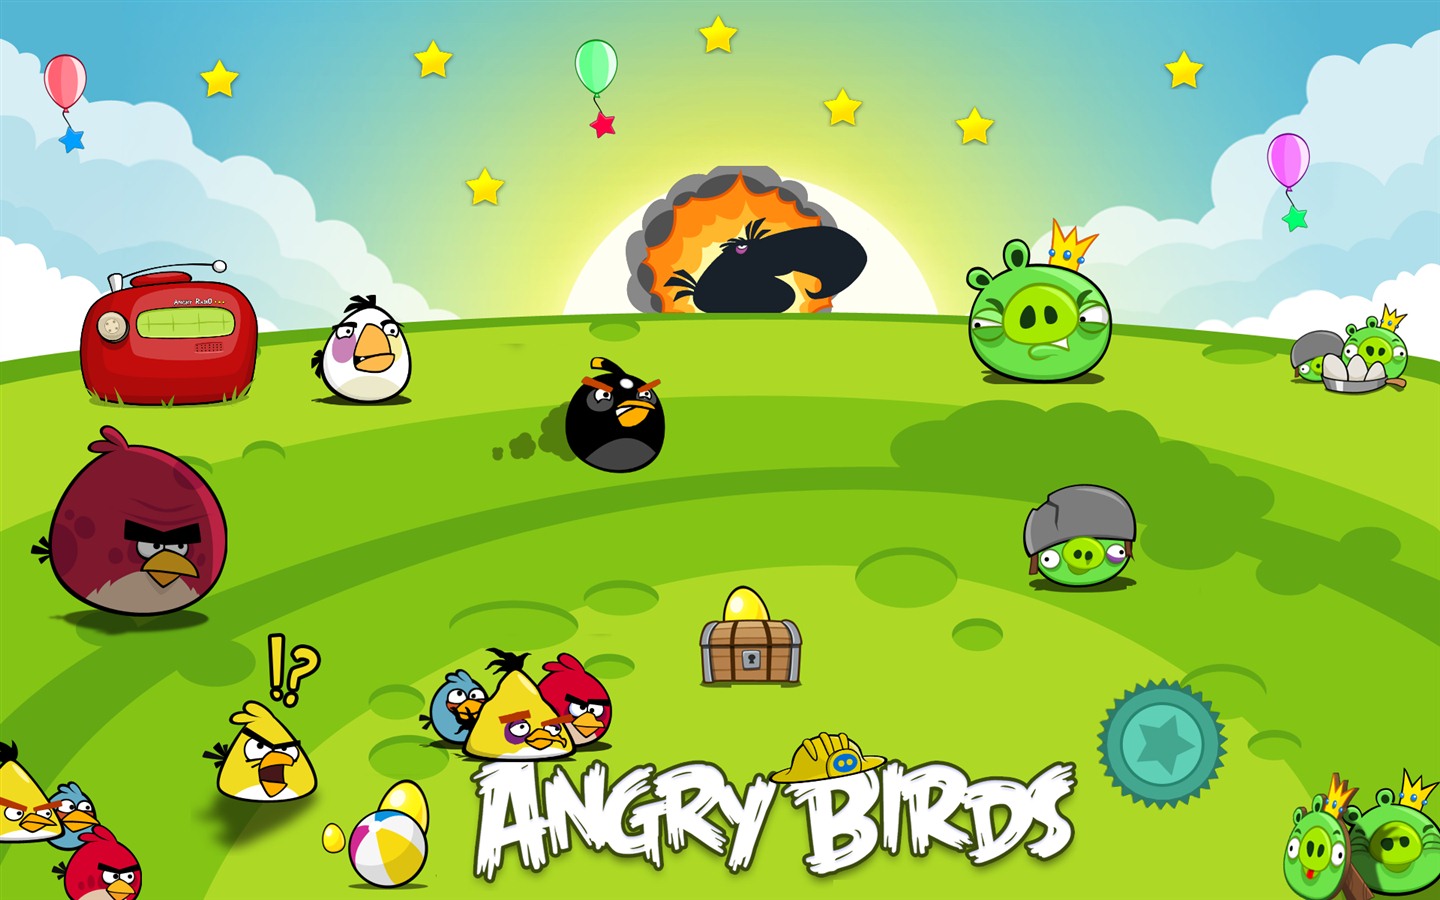 Angry Birds Game Wallpapers #12 - 1440x900